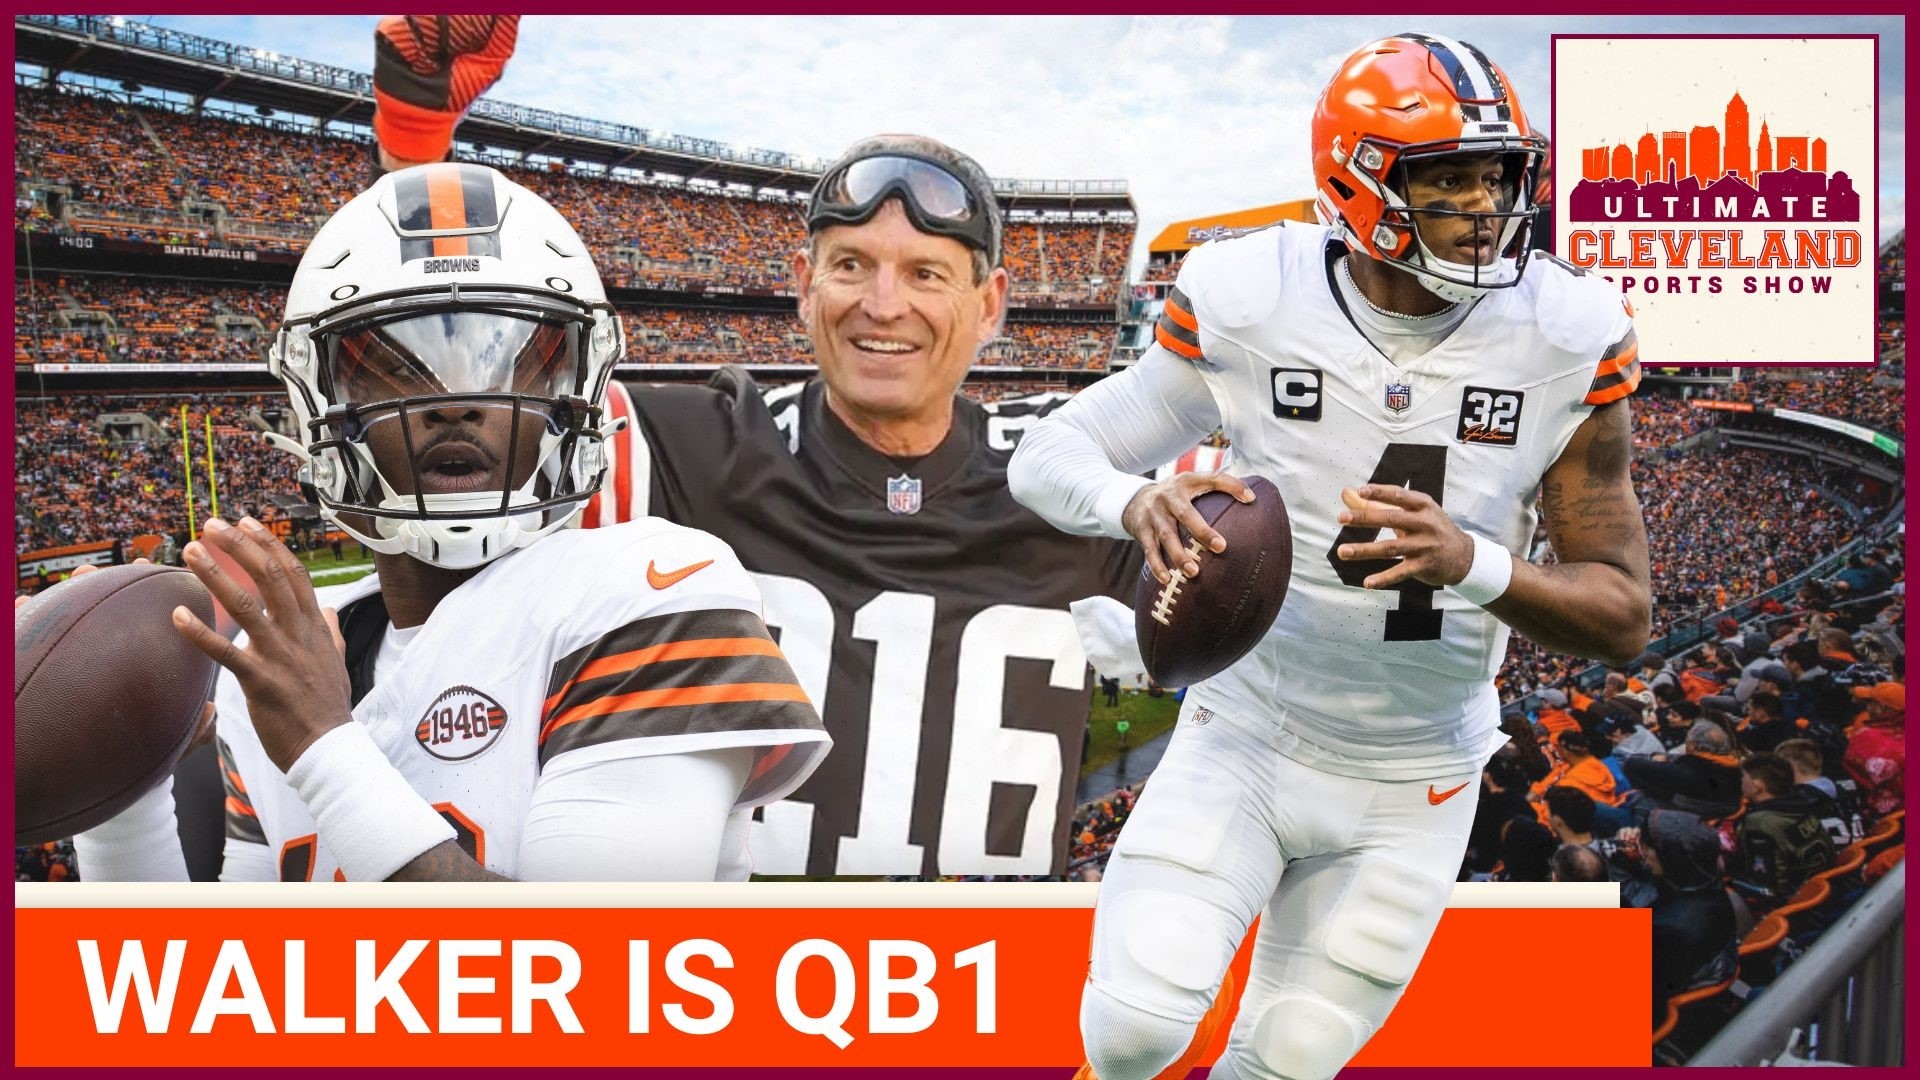 It is PJ Walker time for the Cleveland Browns! And if we're talking QBs, who better to have in studio than former Browns QB Bernie Kosar, who spent his weekend watch